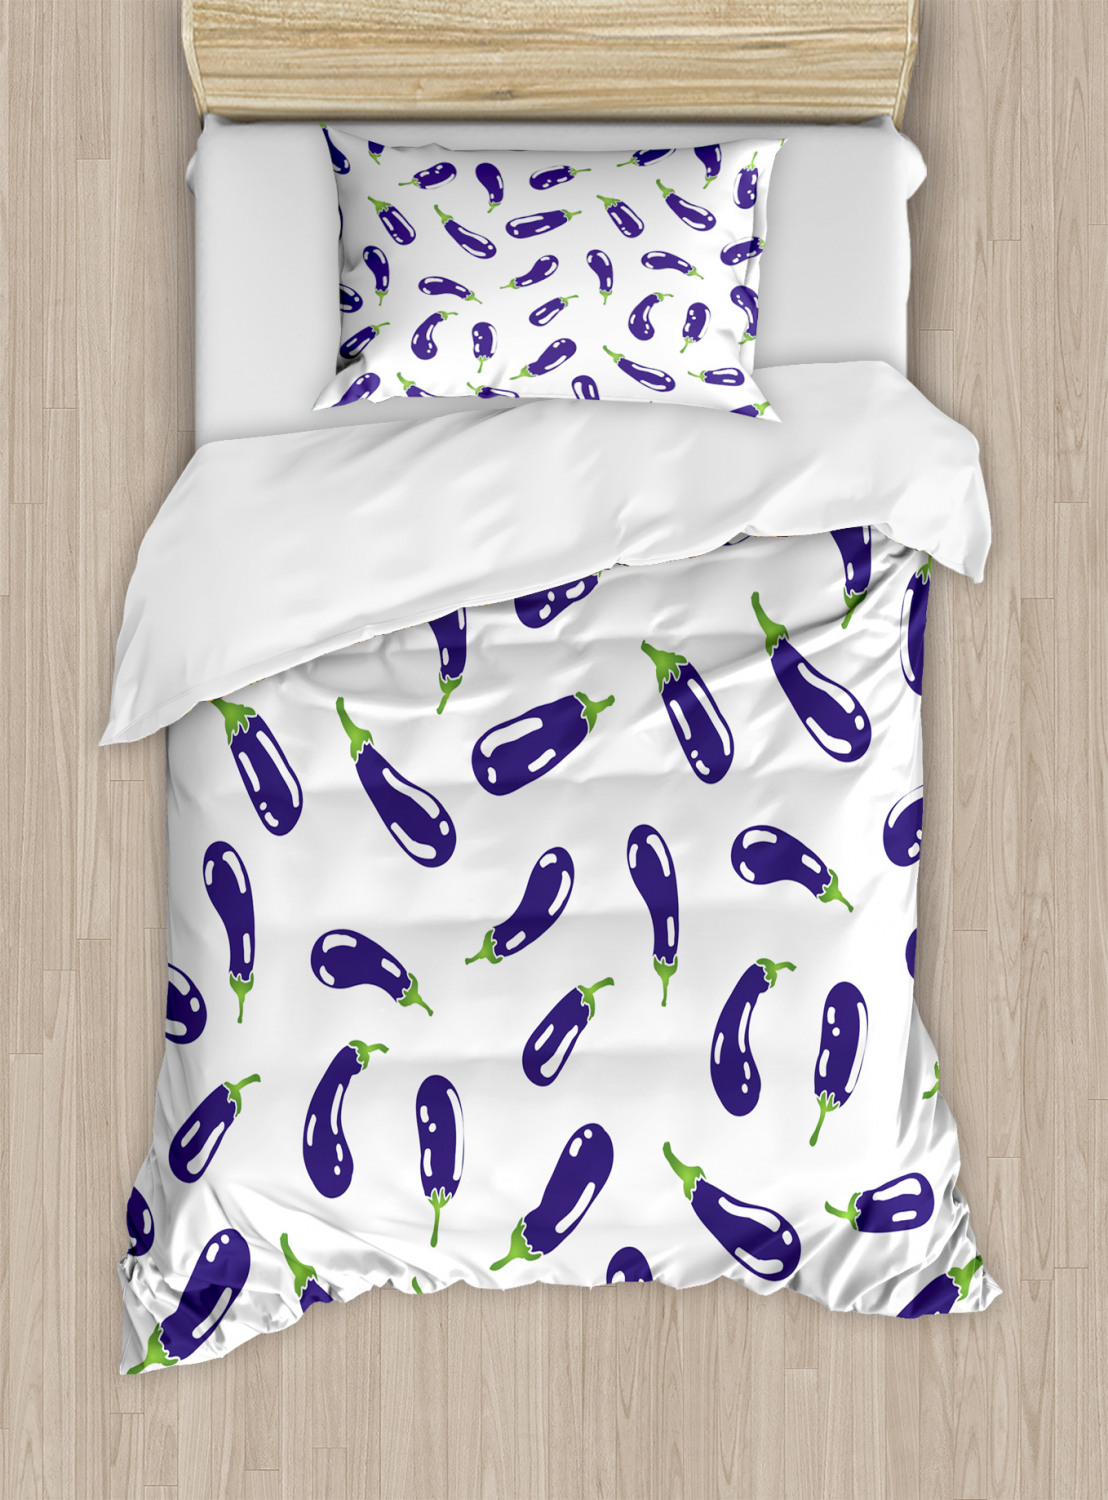 Eggplant Duvet Cover Set Twin Queen King Sizes With Pillow Shams